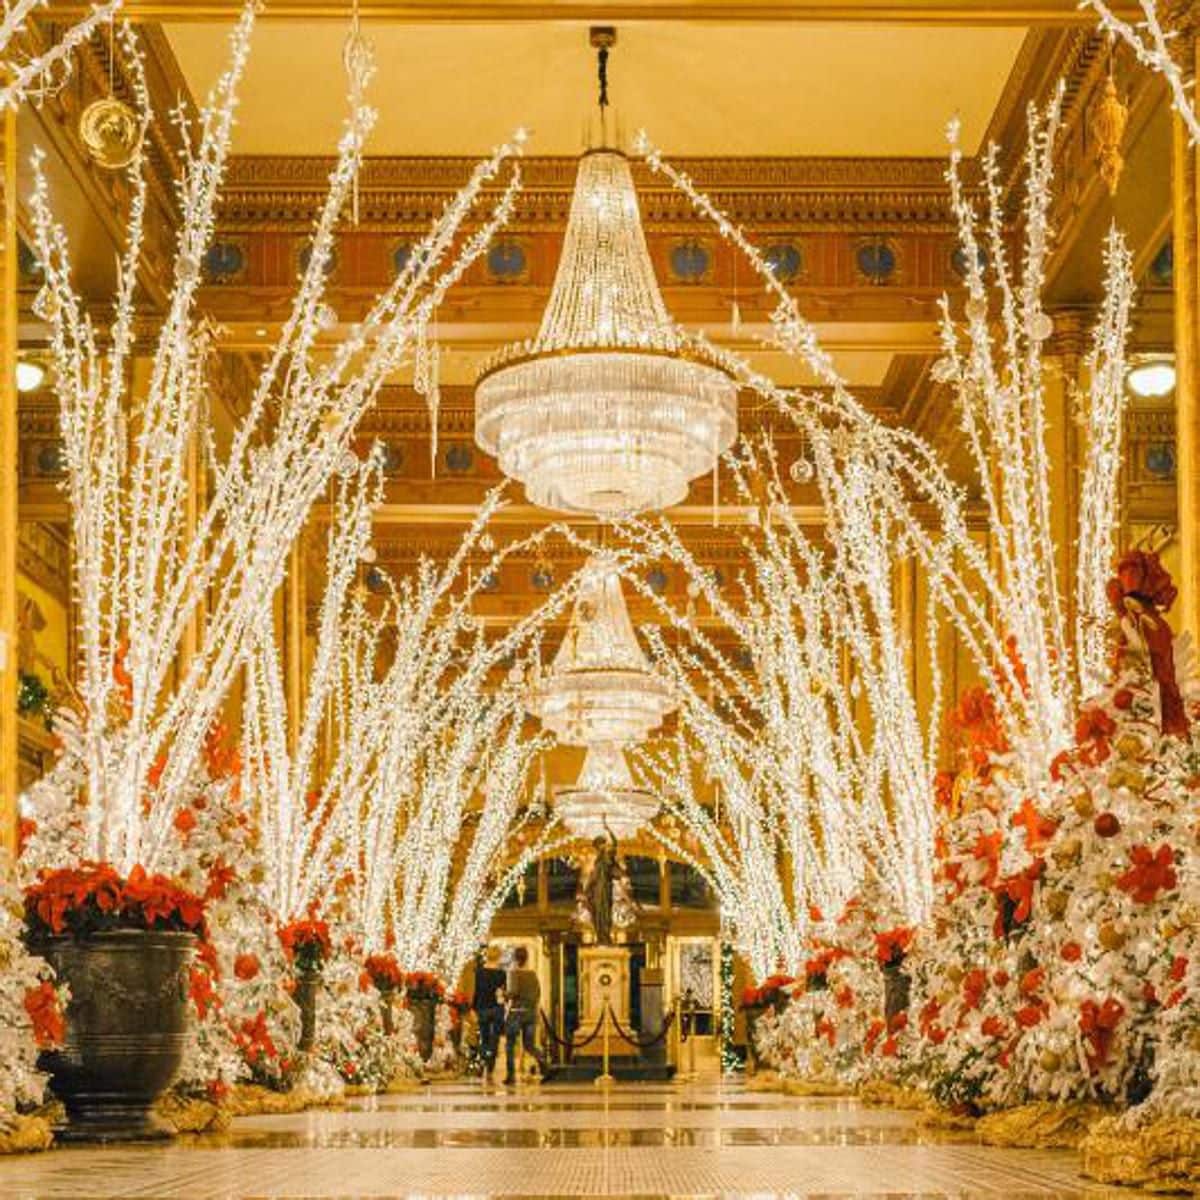 Take a stroll through the "Waldorf Wonderland" in New Orleans. The lobby of The Roosevelt New Orleans, A Waldorf Astoria Hotel is decorated with 112,000 lights, 1,600 feet of garland and 4,000 glass ornaments. After taking in the block-long holiday decor, you can grab a handcrafted holiday season drink at The Sazerac Bar.